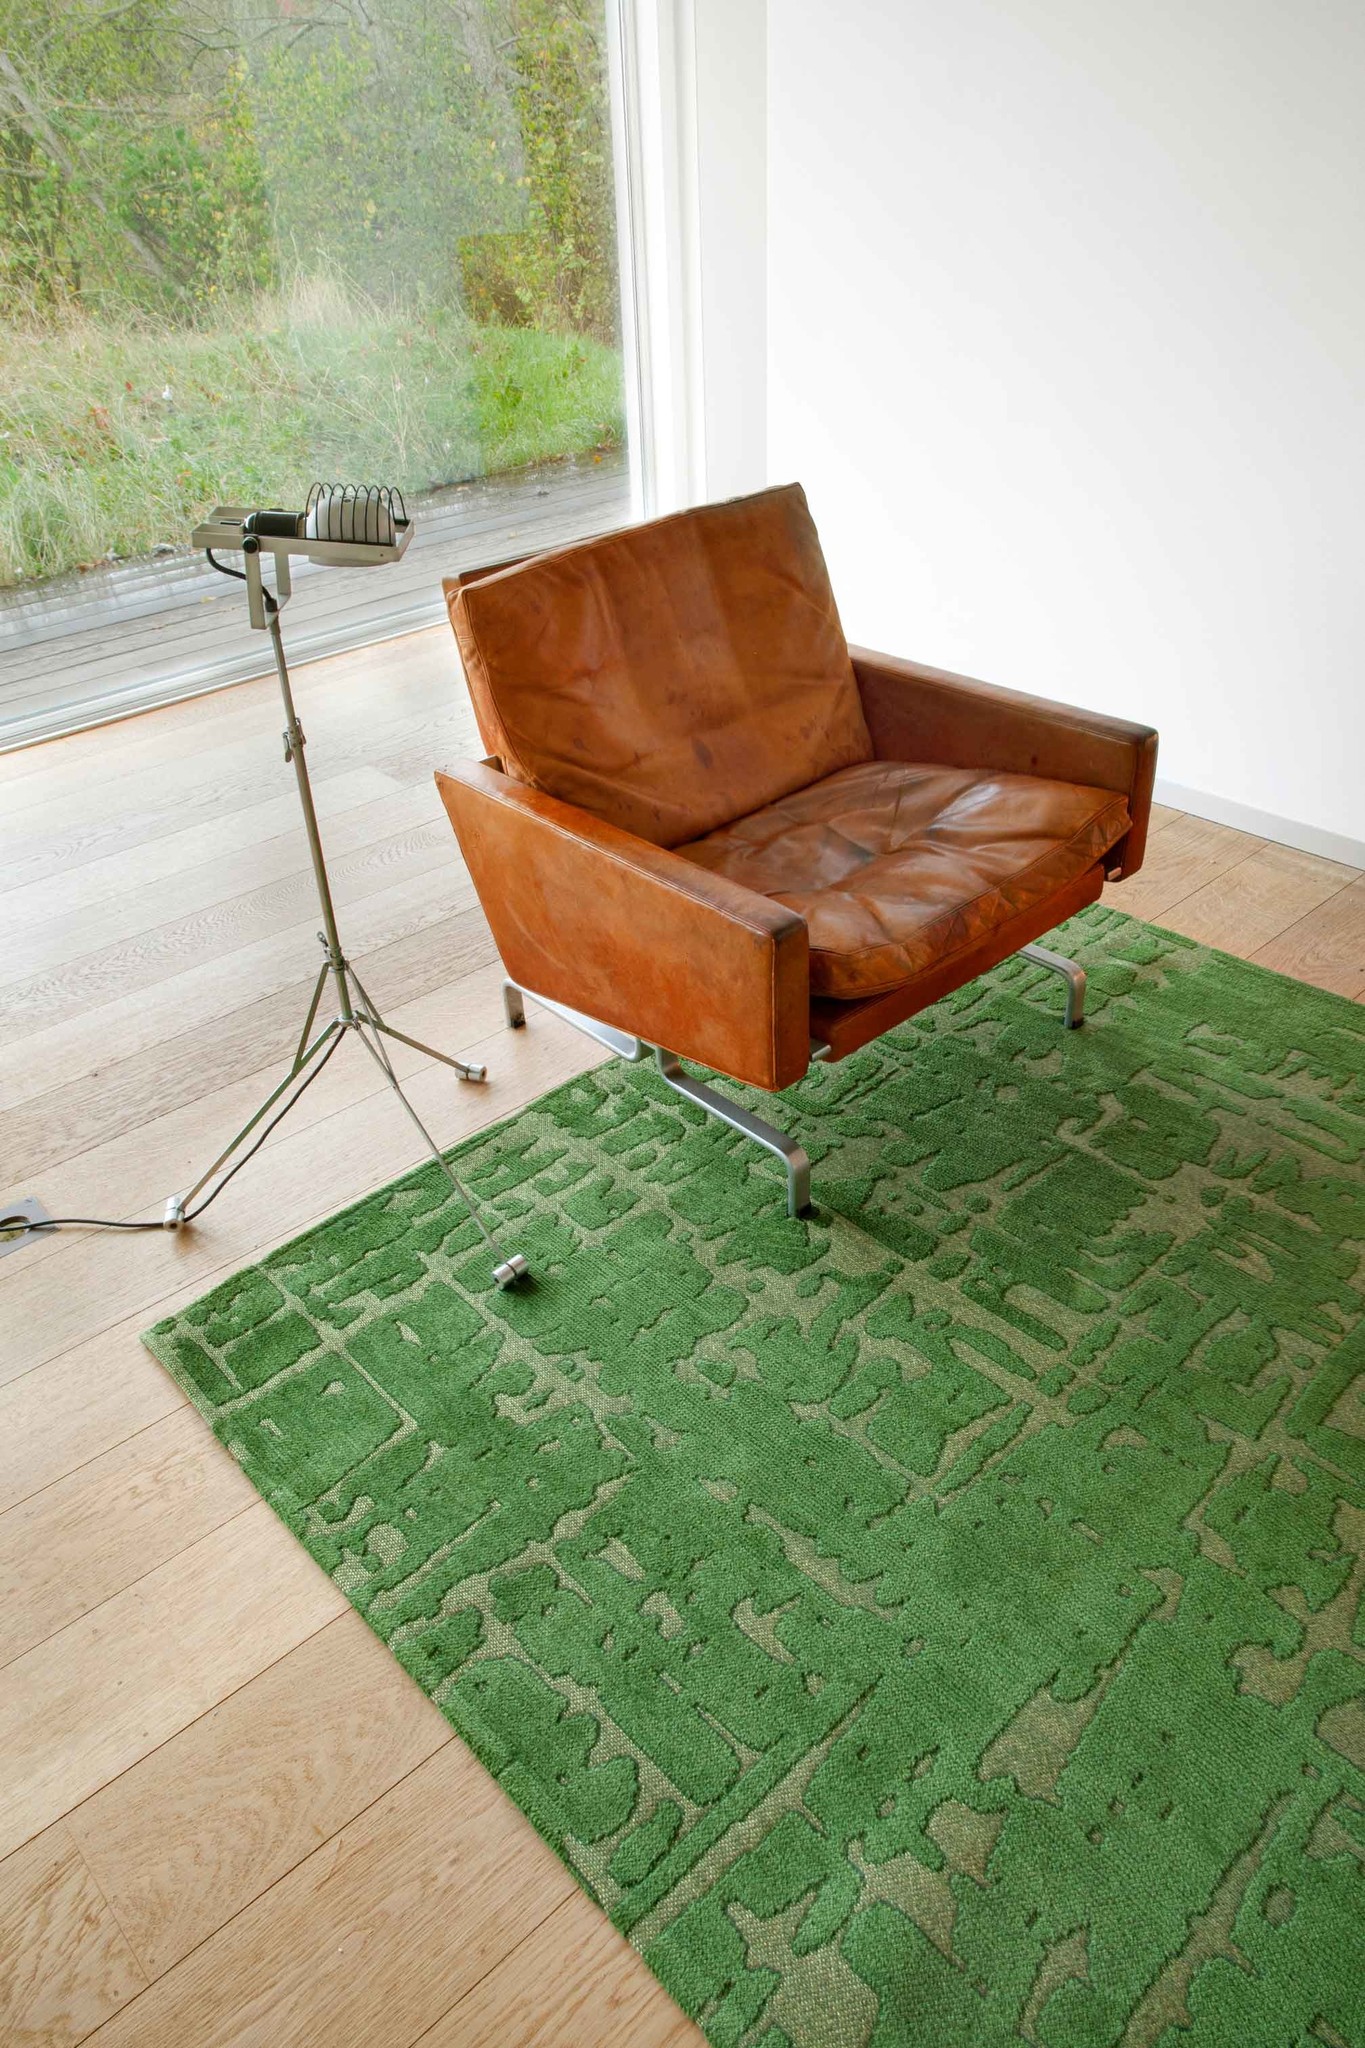 Abstract Green Belgian Rug ☞ Size: 4' 7" x 6' 7" (140 x 200 cm)